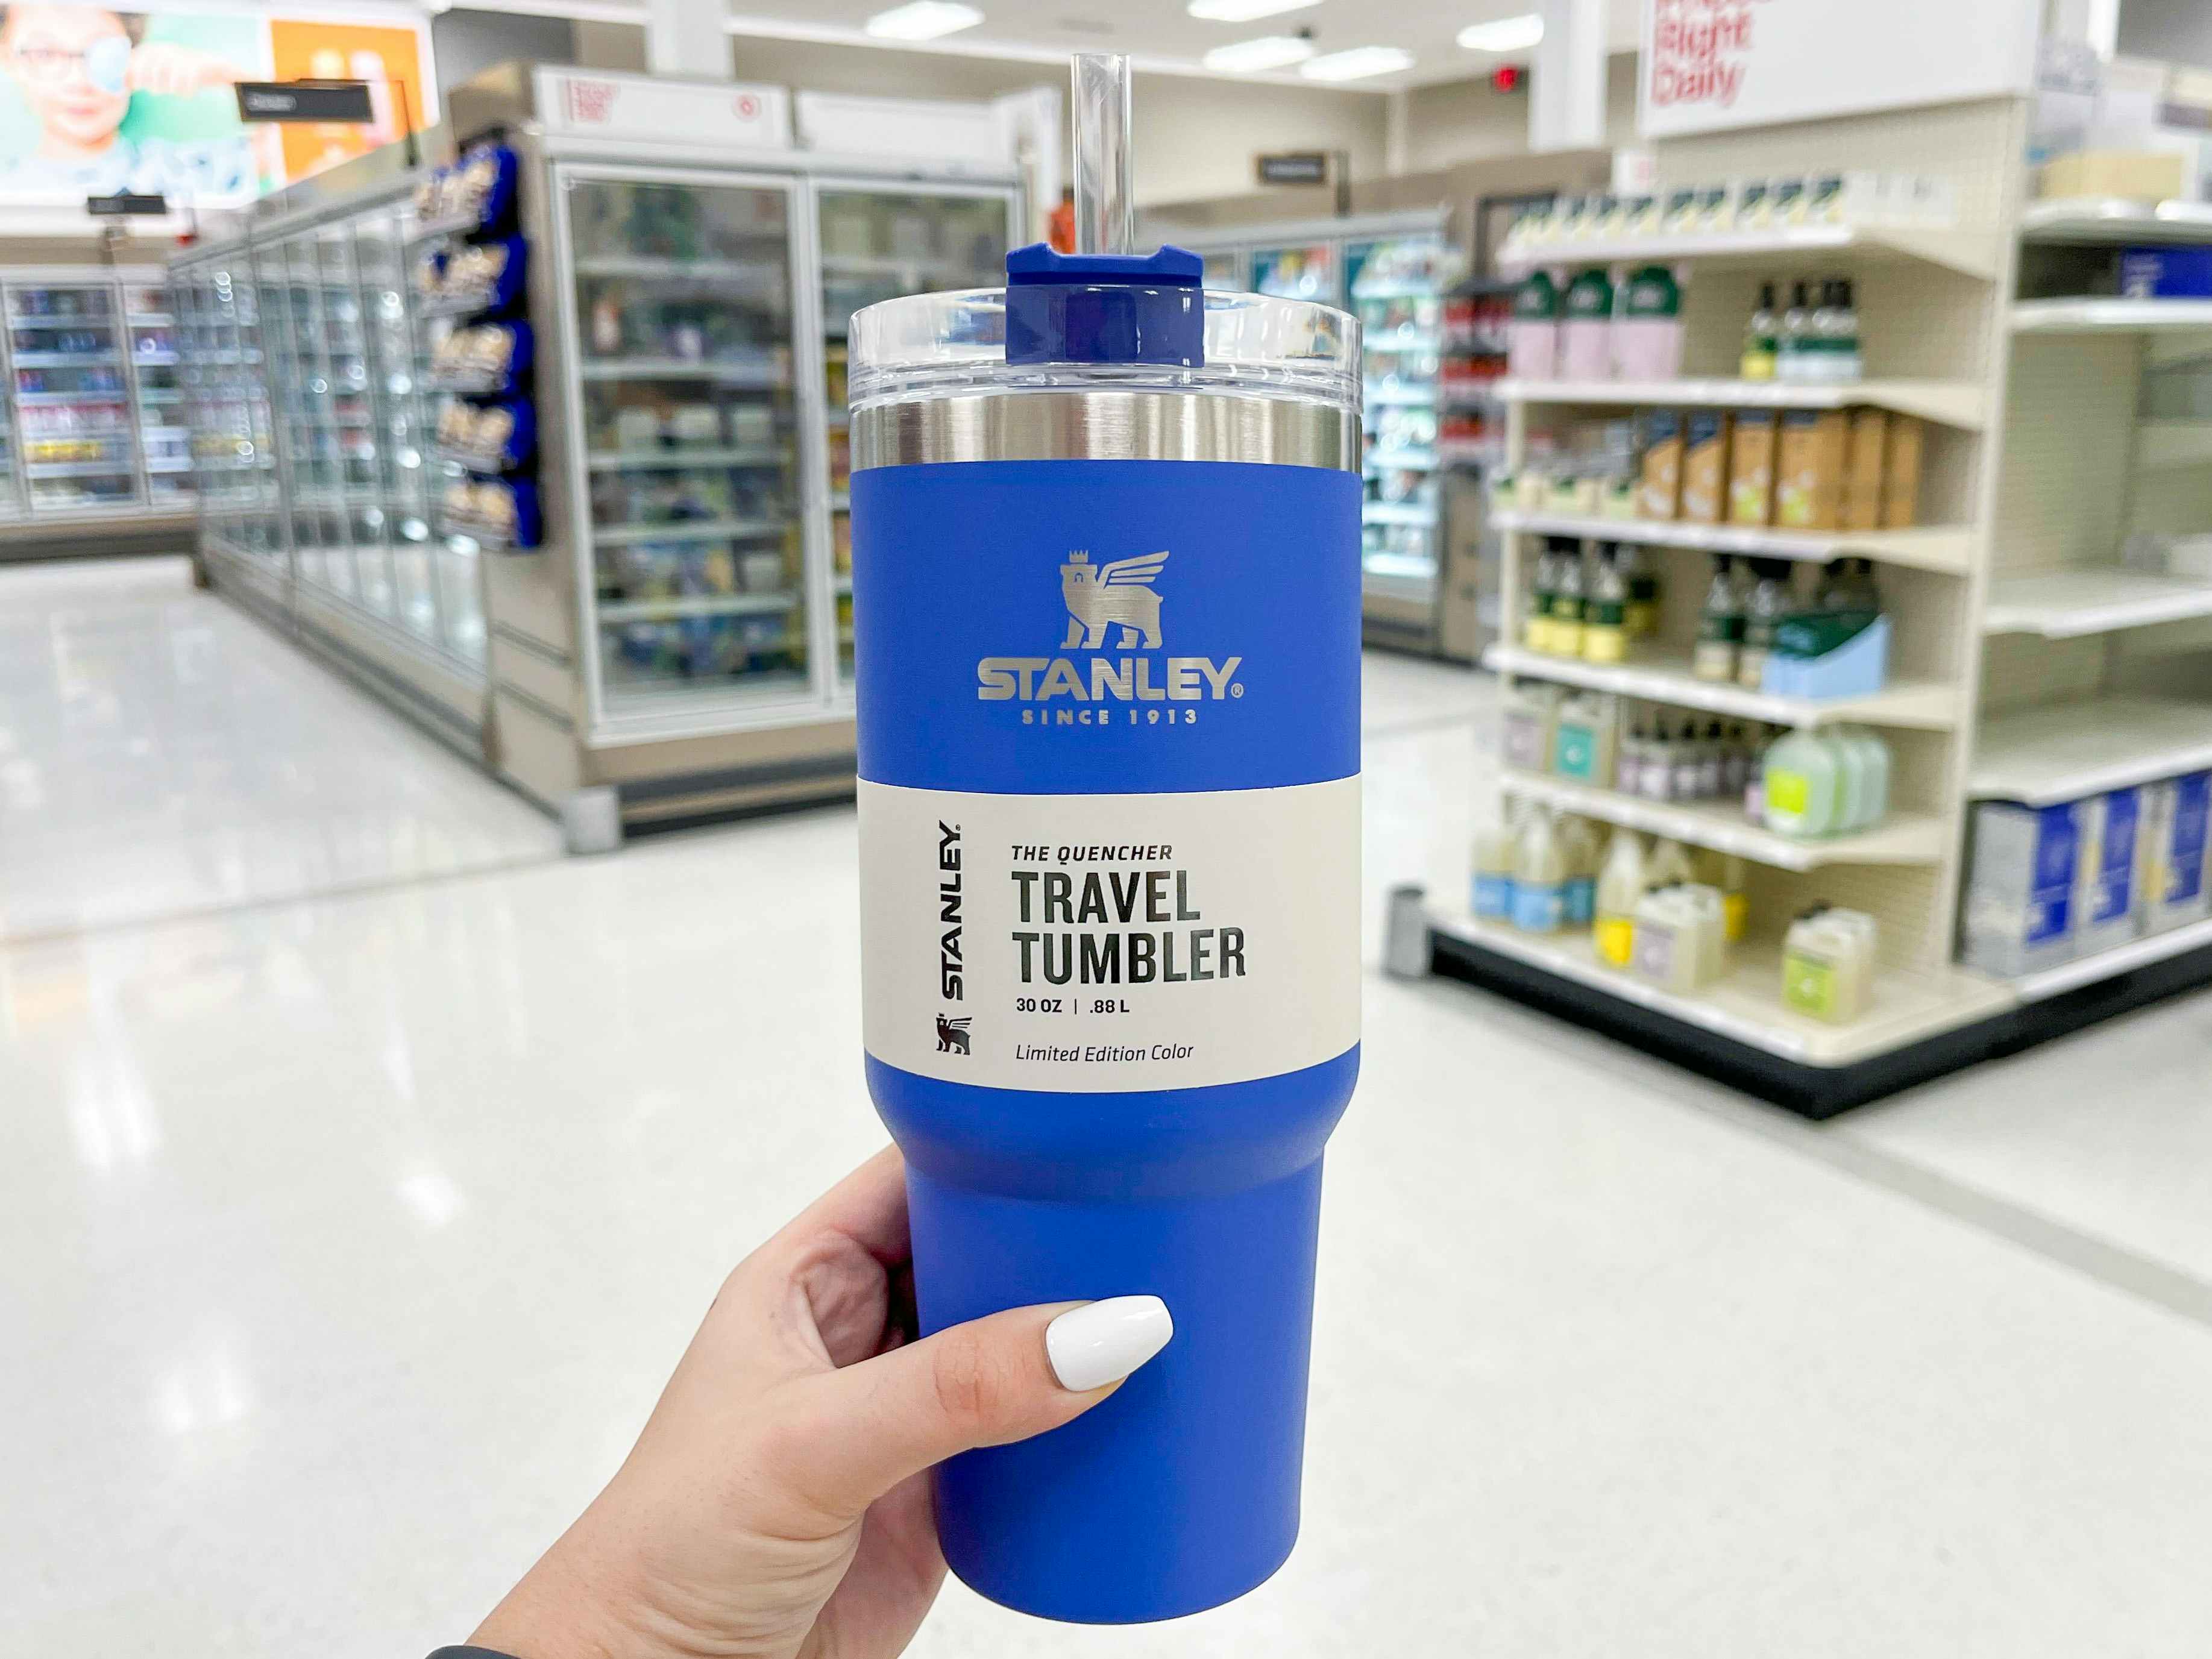 https://prod-cdn-thekrazycouponlady.imgix.net/wp-content/uploads/2022/07/target-exclusive-stanley-adventure-travel-quencher-tumblers-30-oz-1672167007-1672167007.jpg?auto=format&fit=fill&q=25